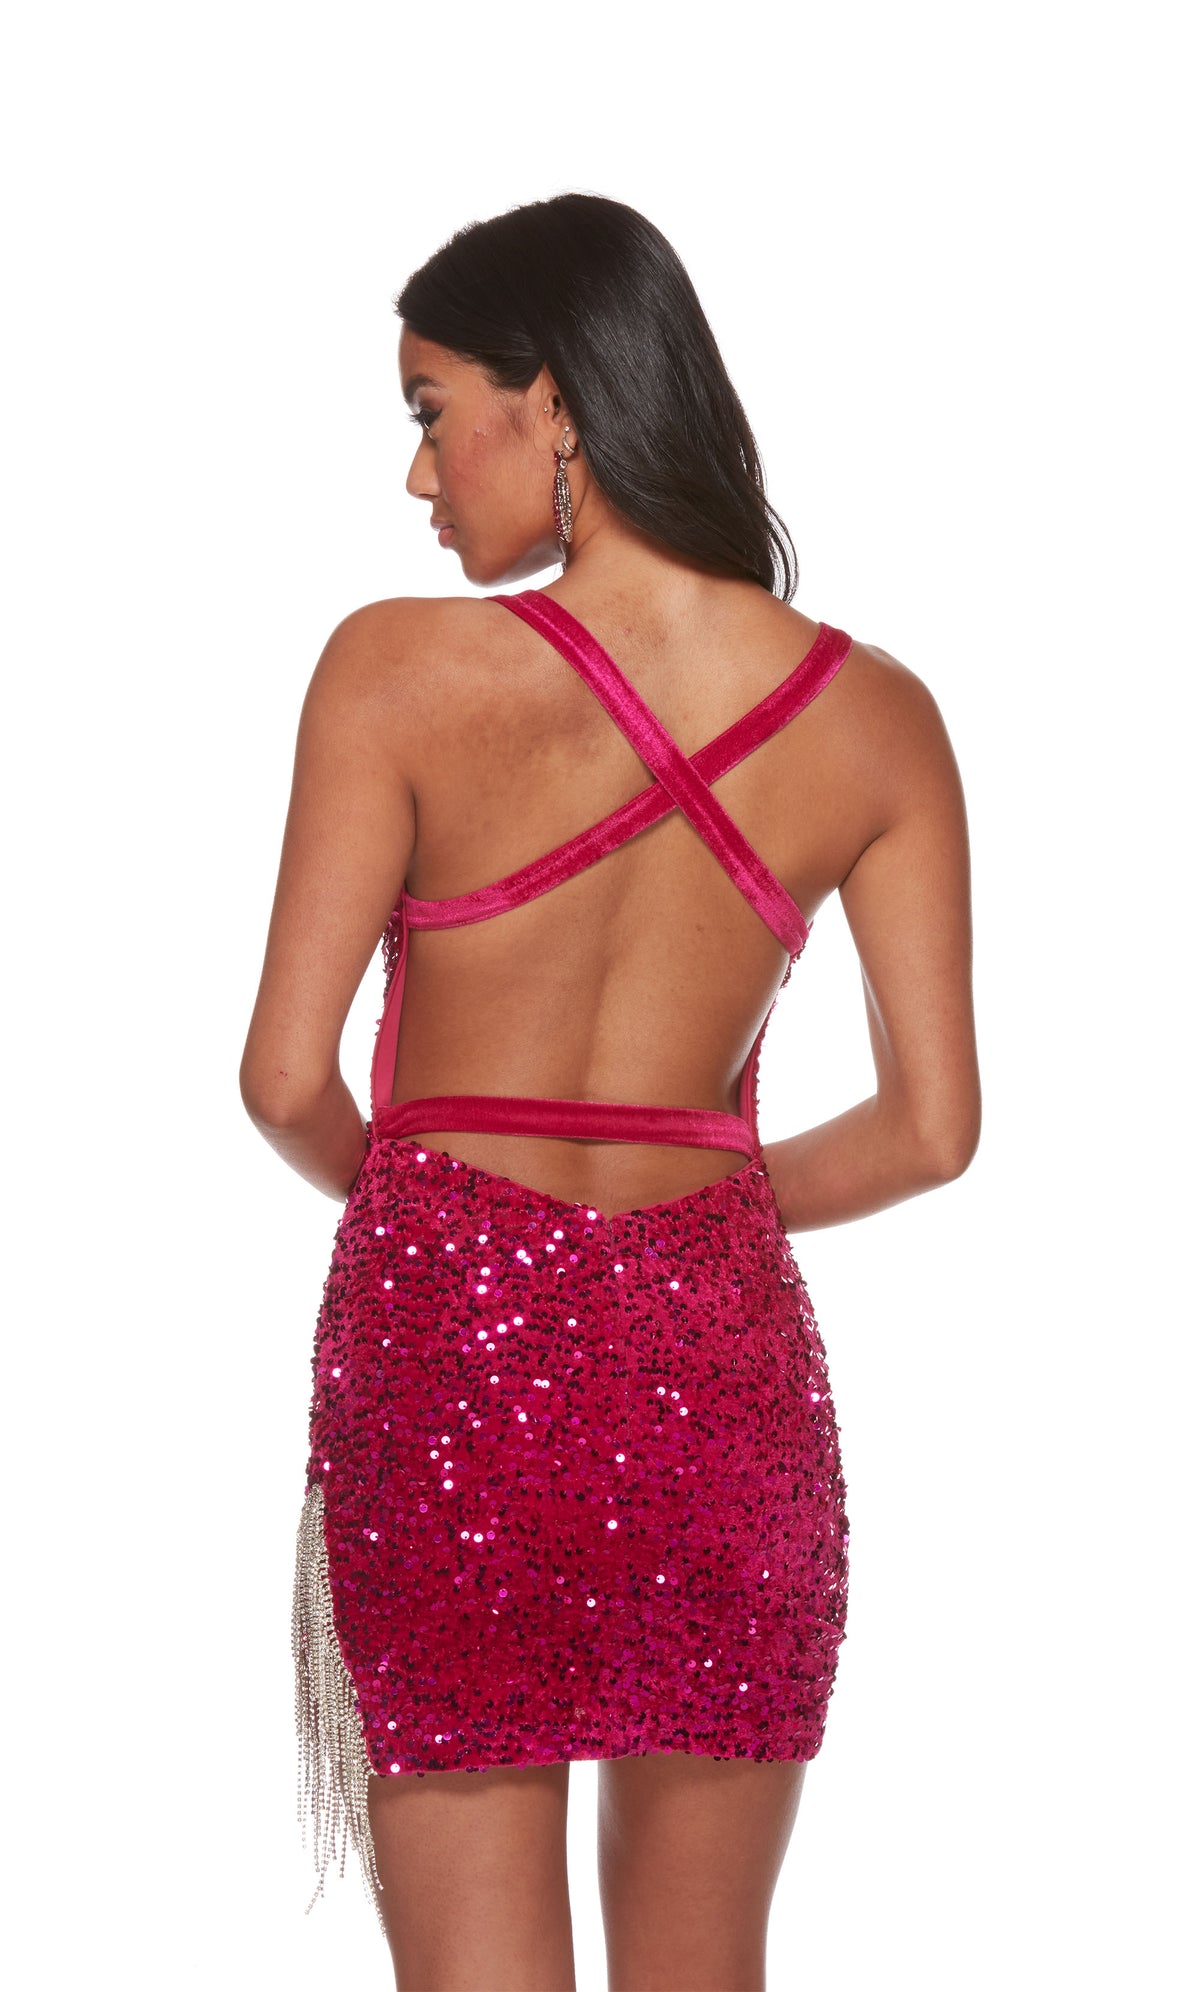 A raspberry colored, halter neck short formal dress made of soft, plush sequins. The dress is designed in a fitted silhouette and features silver fringe accents on the left  side, creating a glamorous and fun look. The back of the dress has criss cross straps.